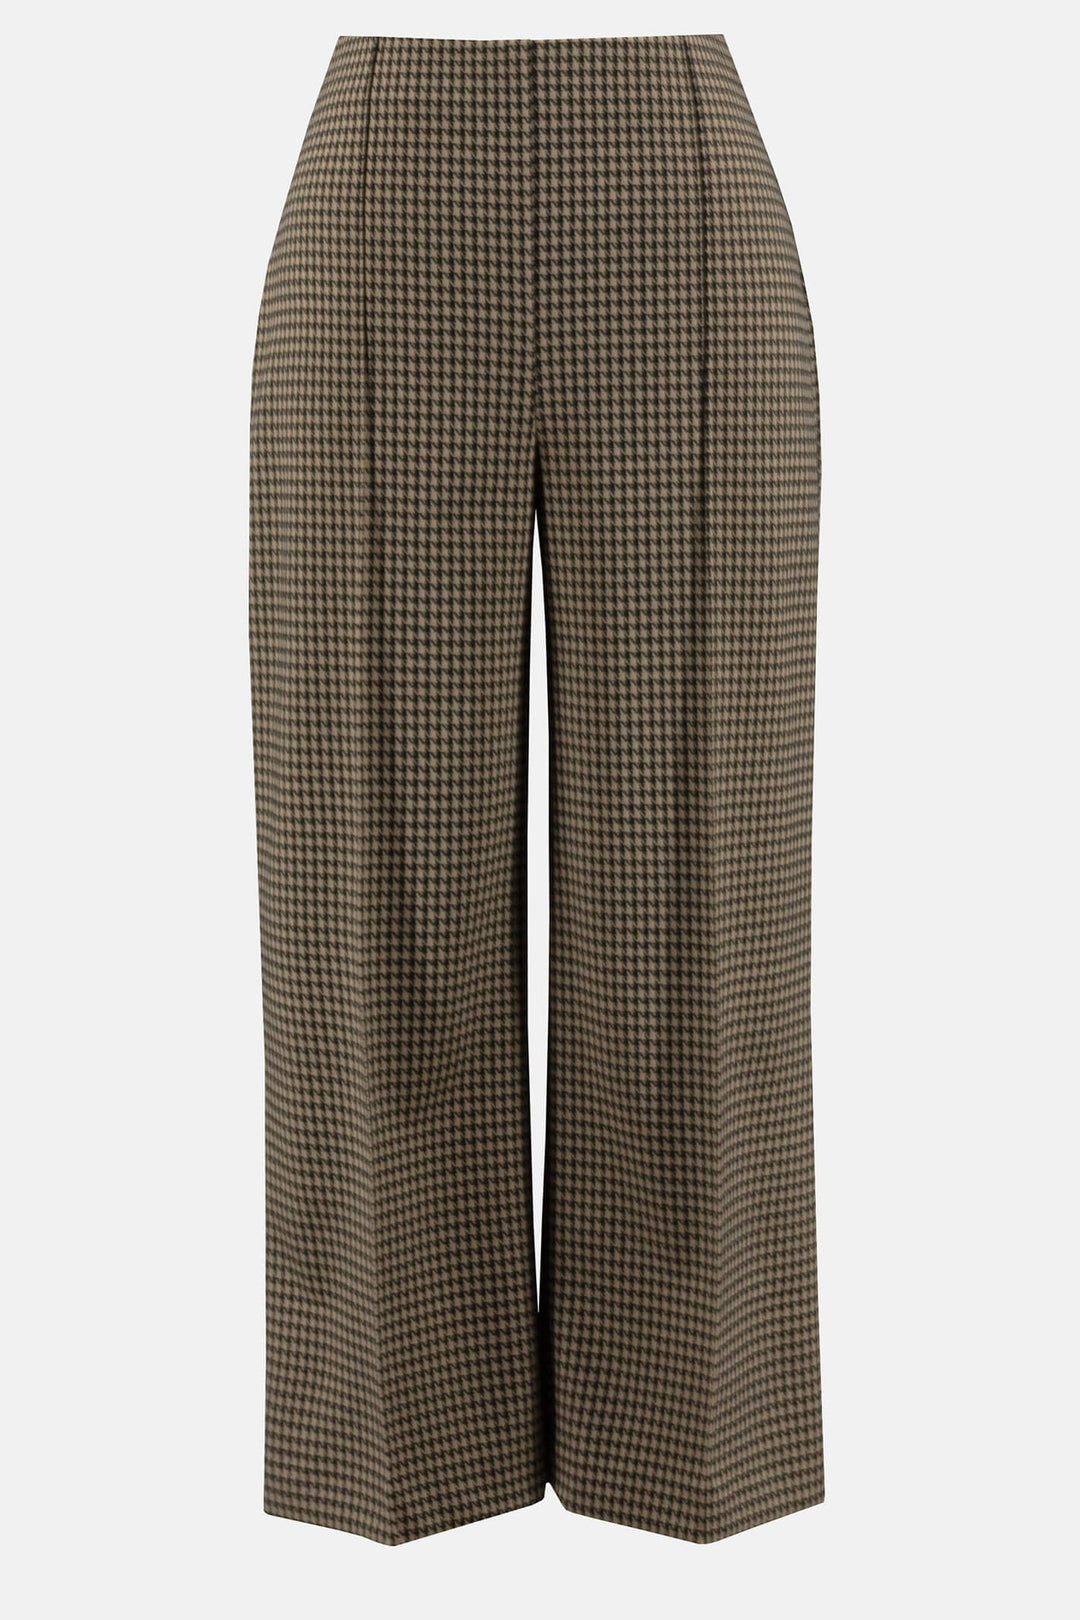 Joseph Ribkoff 233249 Black & Brown Houndstooth Wide Leg Trousers - Experience Boutique